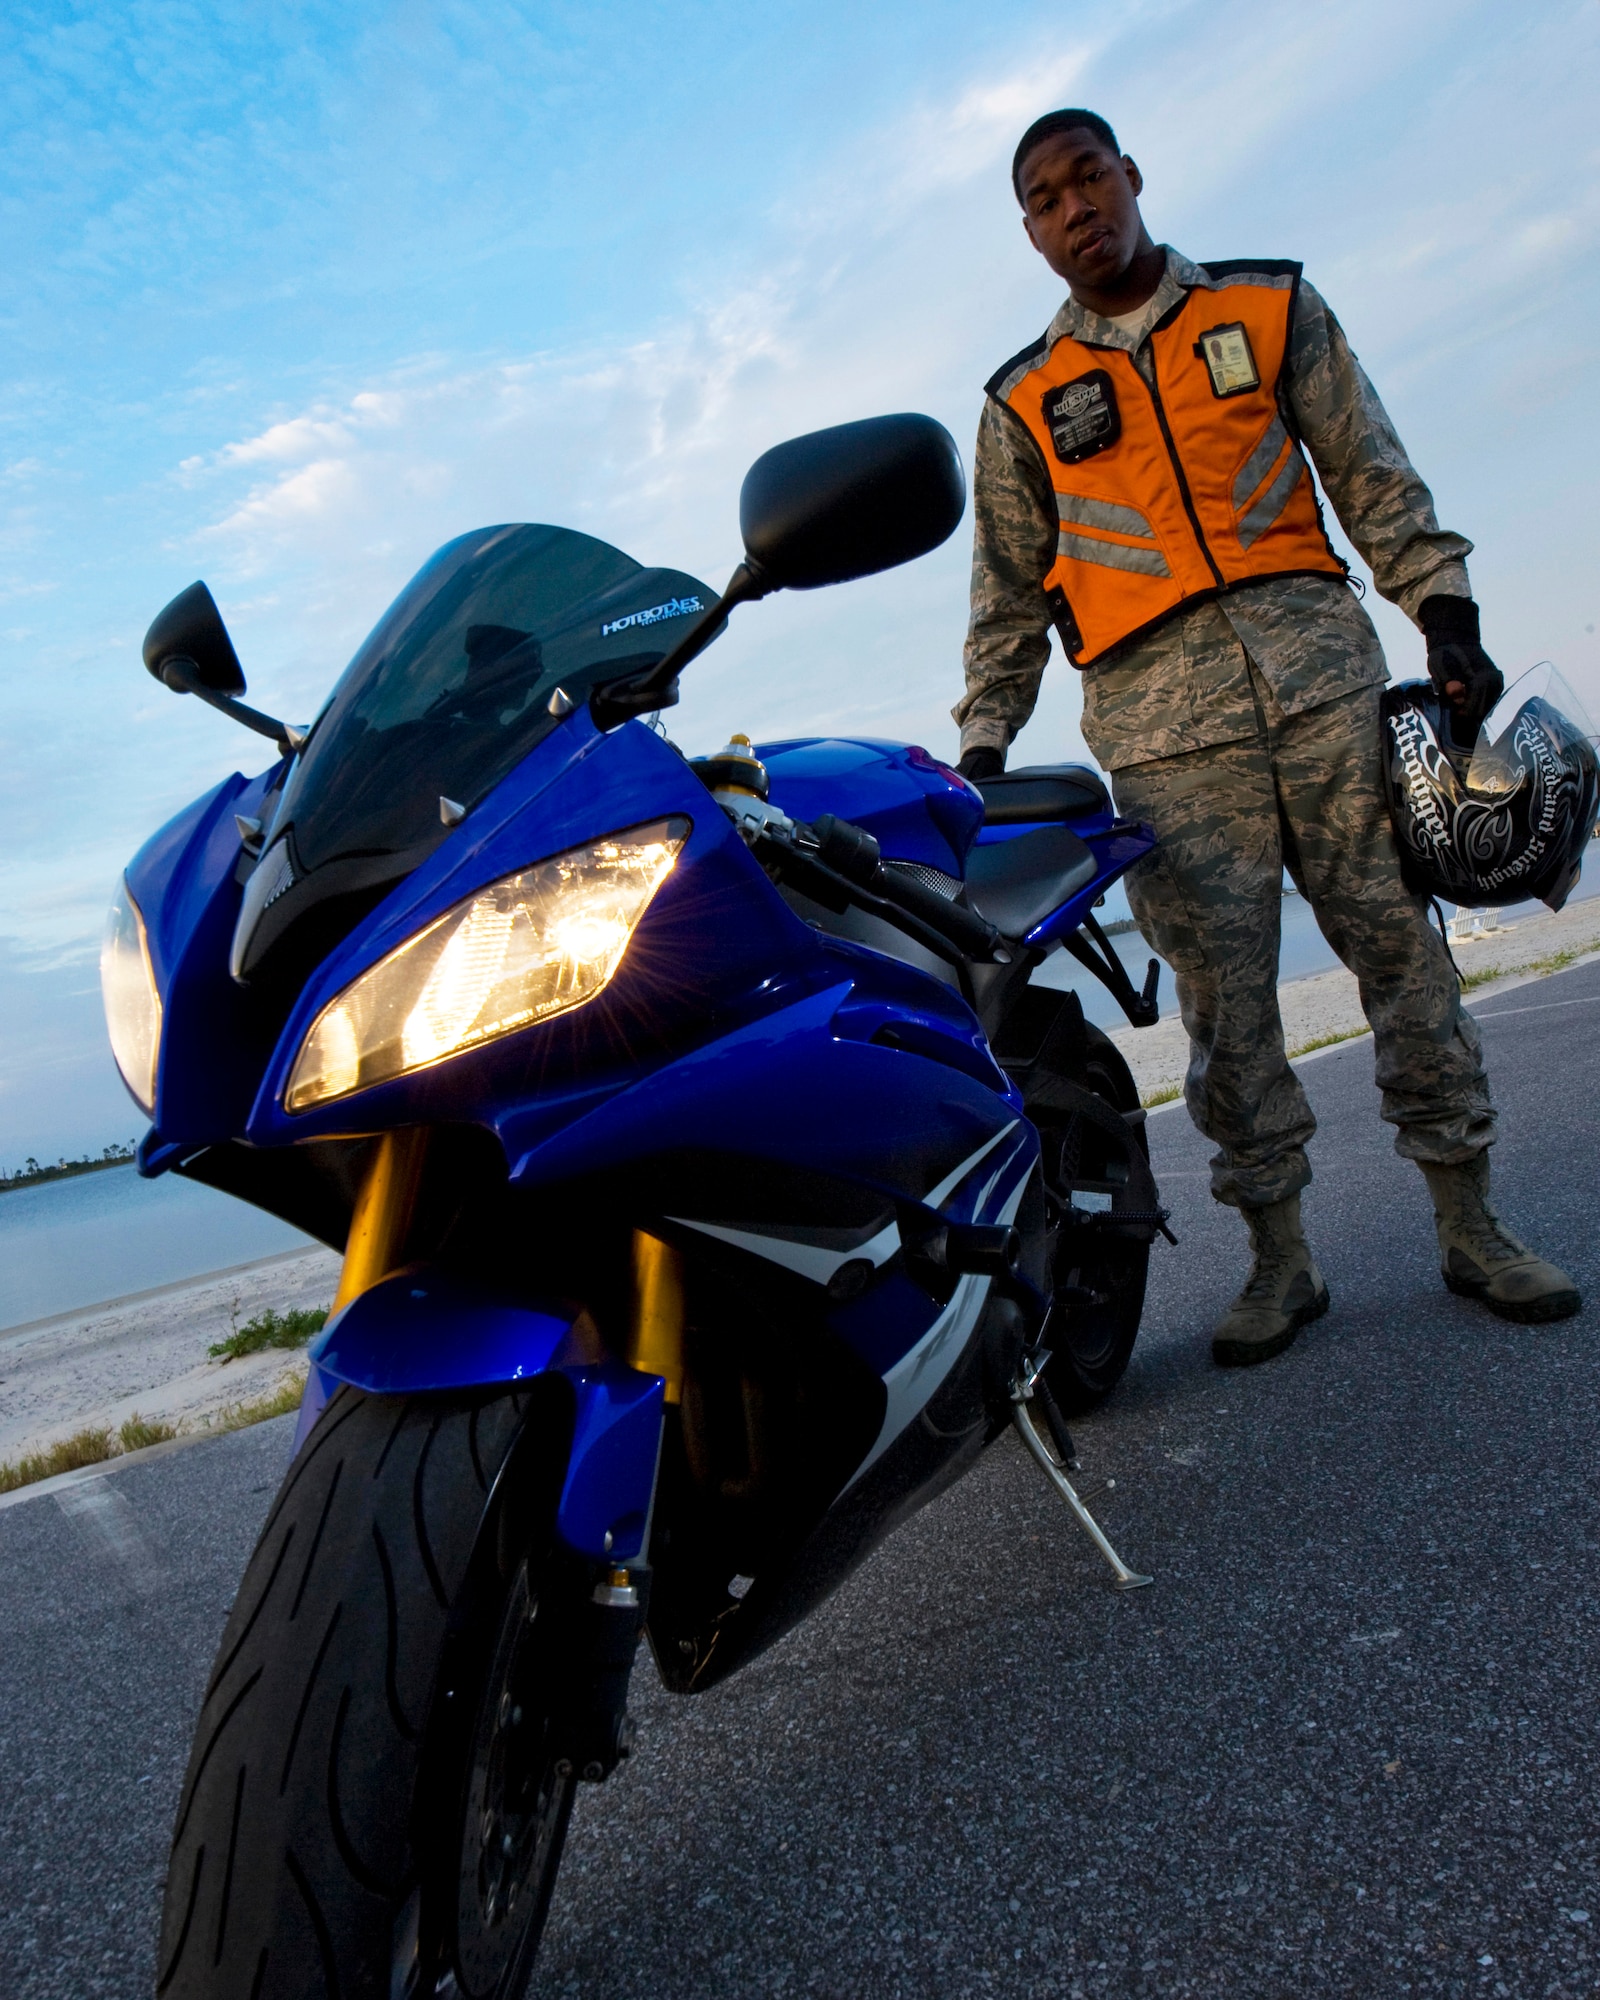 U.S. Air Force Staff Sgt. Dwayne Hopkins, an air transportation craftsman from the 1st Special Operations Logistics Readiness Squadron, stands next to his motorcycle on Hurlburt Field, Fla., Oct. 3, 2012. Hopkins? personal protective equipment prevented him from being seriously injured during a motorcycle accident and afforded him the opportunity to tell his story as a member of the Airman to Airman Safety Advisory Council. (U.S. Air Force Photo / Staff Sgt. John Bainter)
